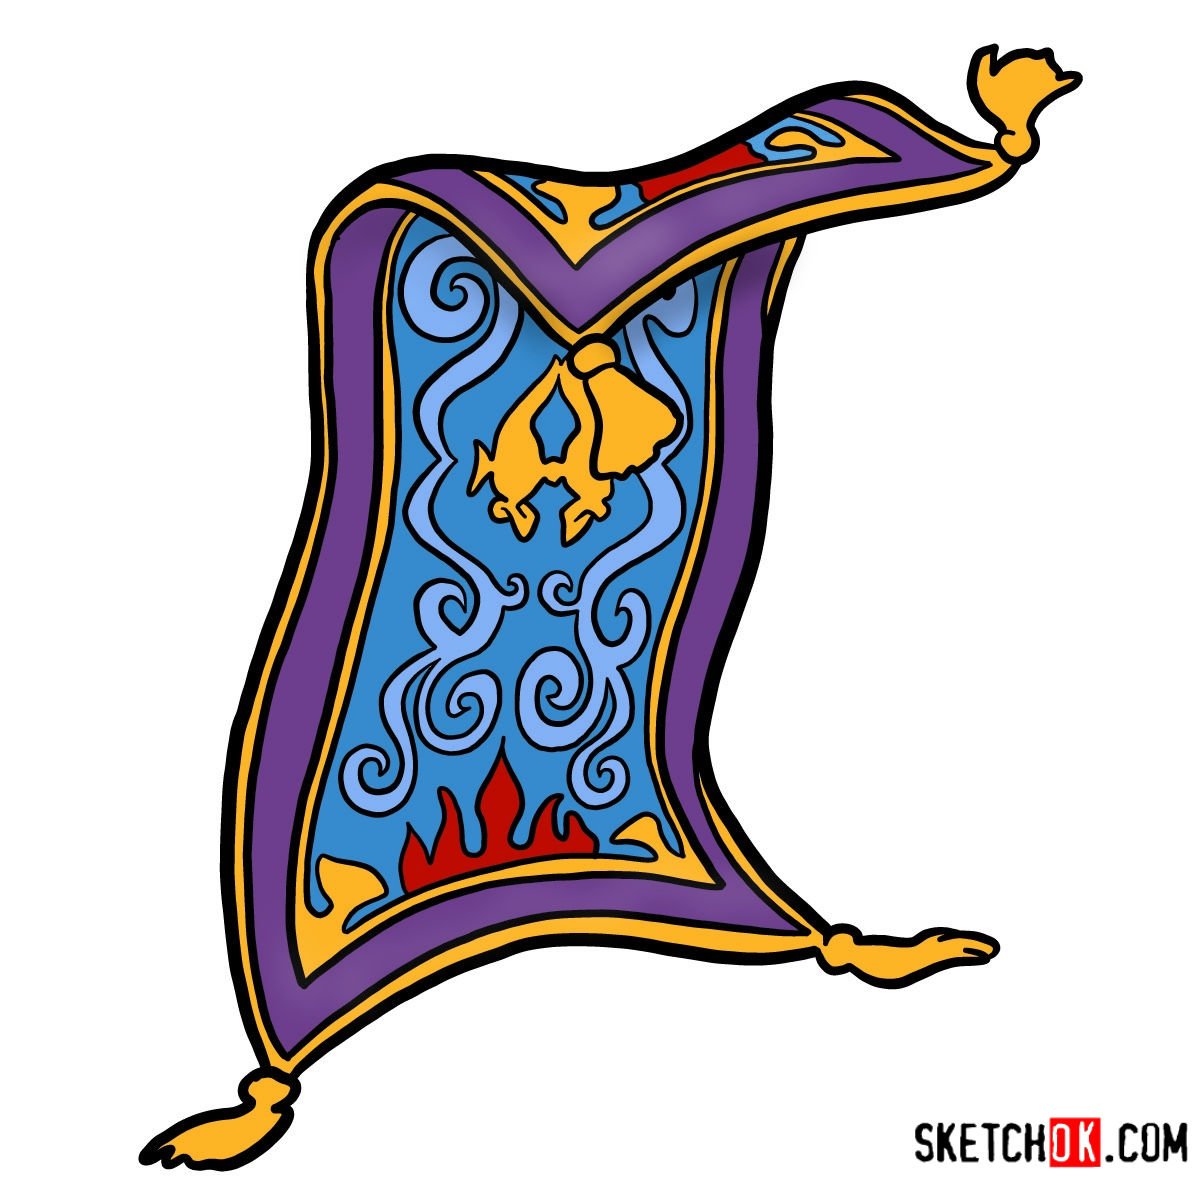 How to draw the Magic Carpet from Aladdin